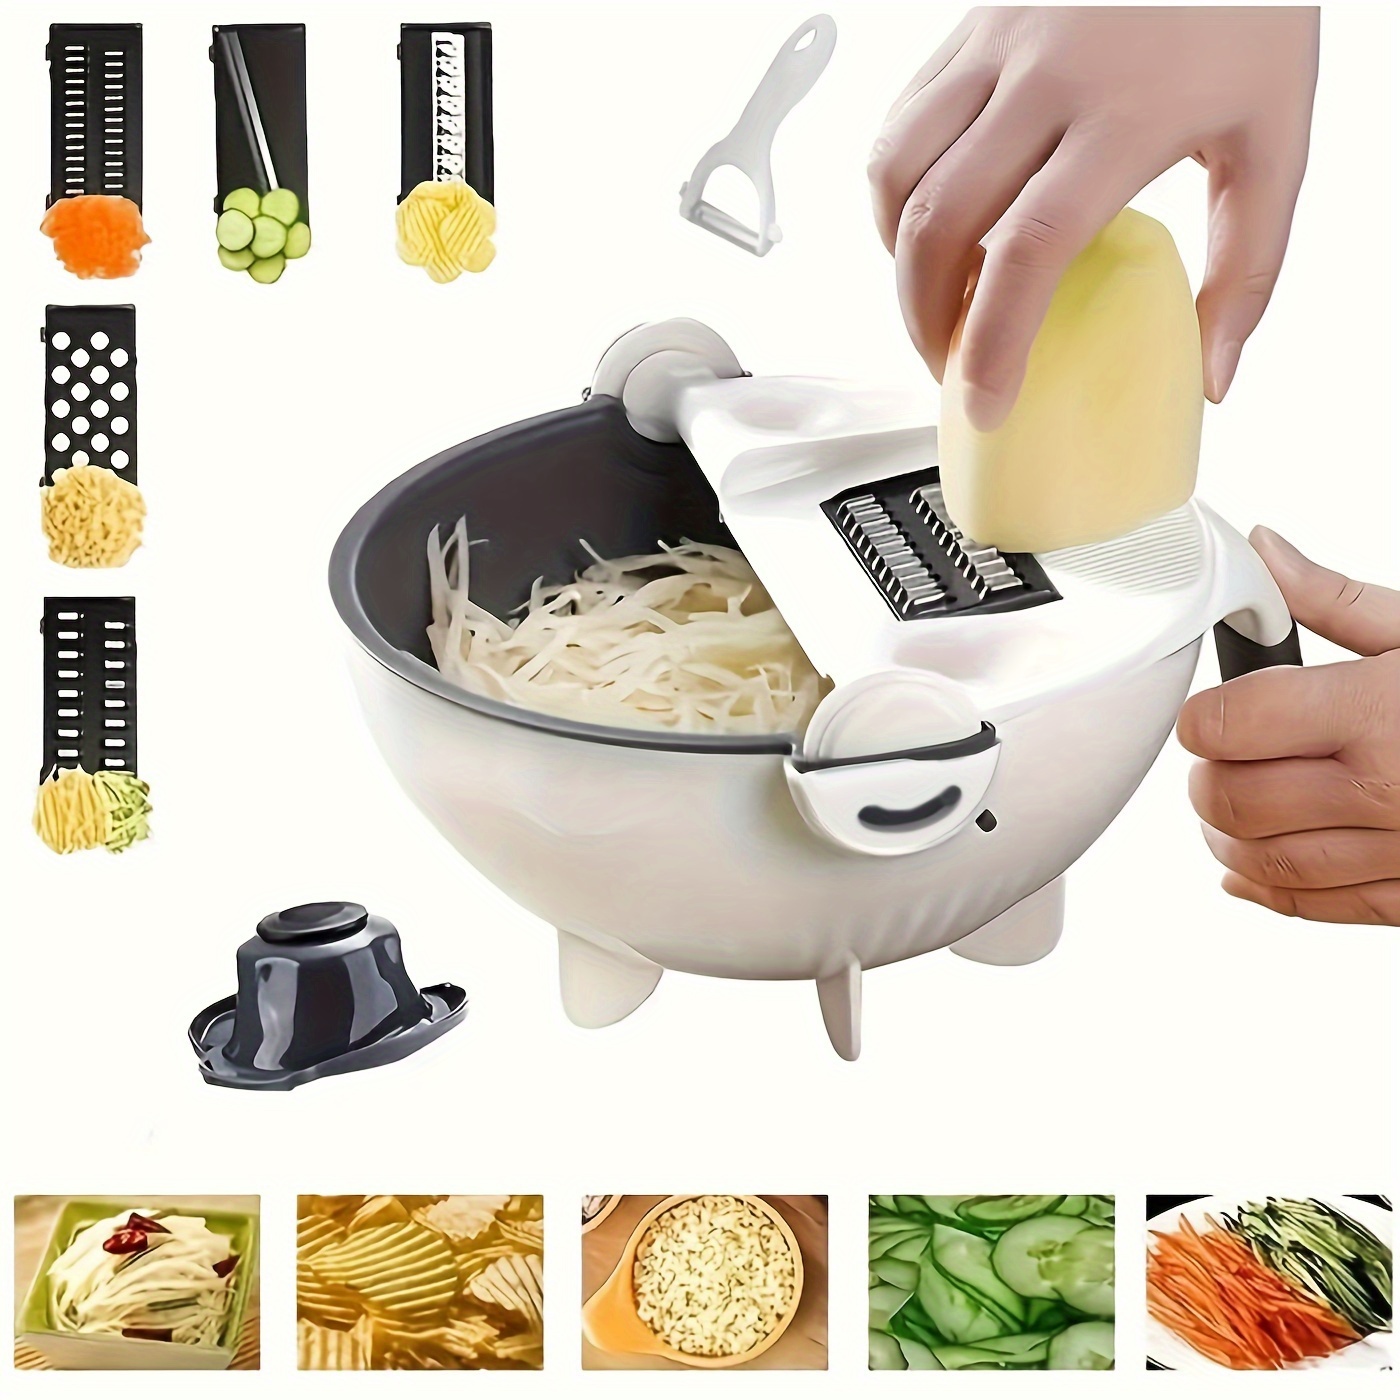 New 9 in 1 Vegetable Cutter Multifunctional Vegetable Slicer with